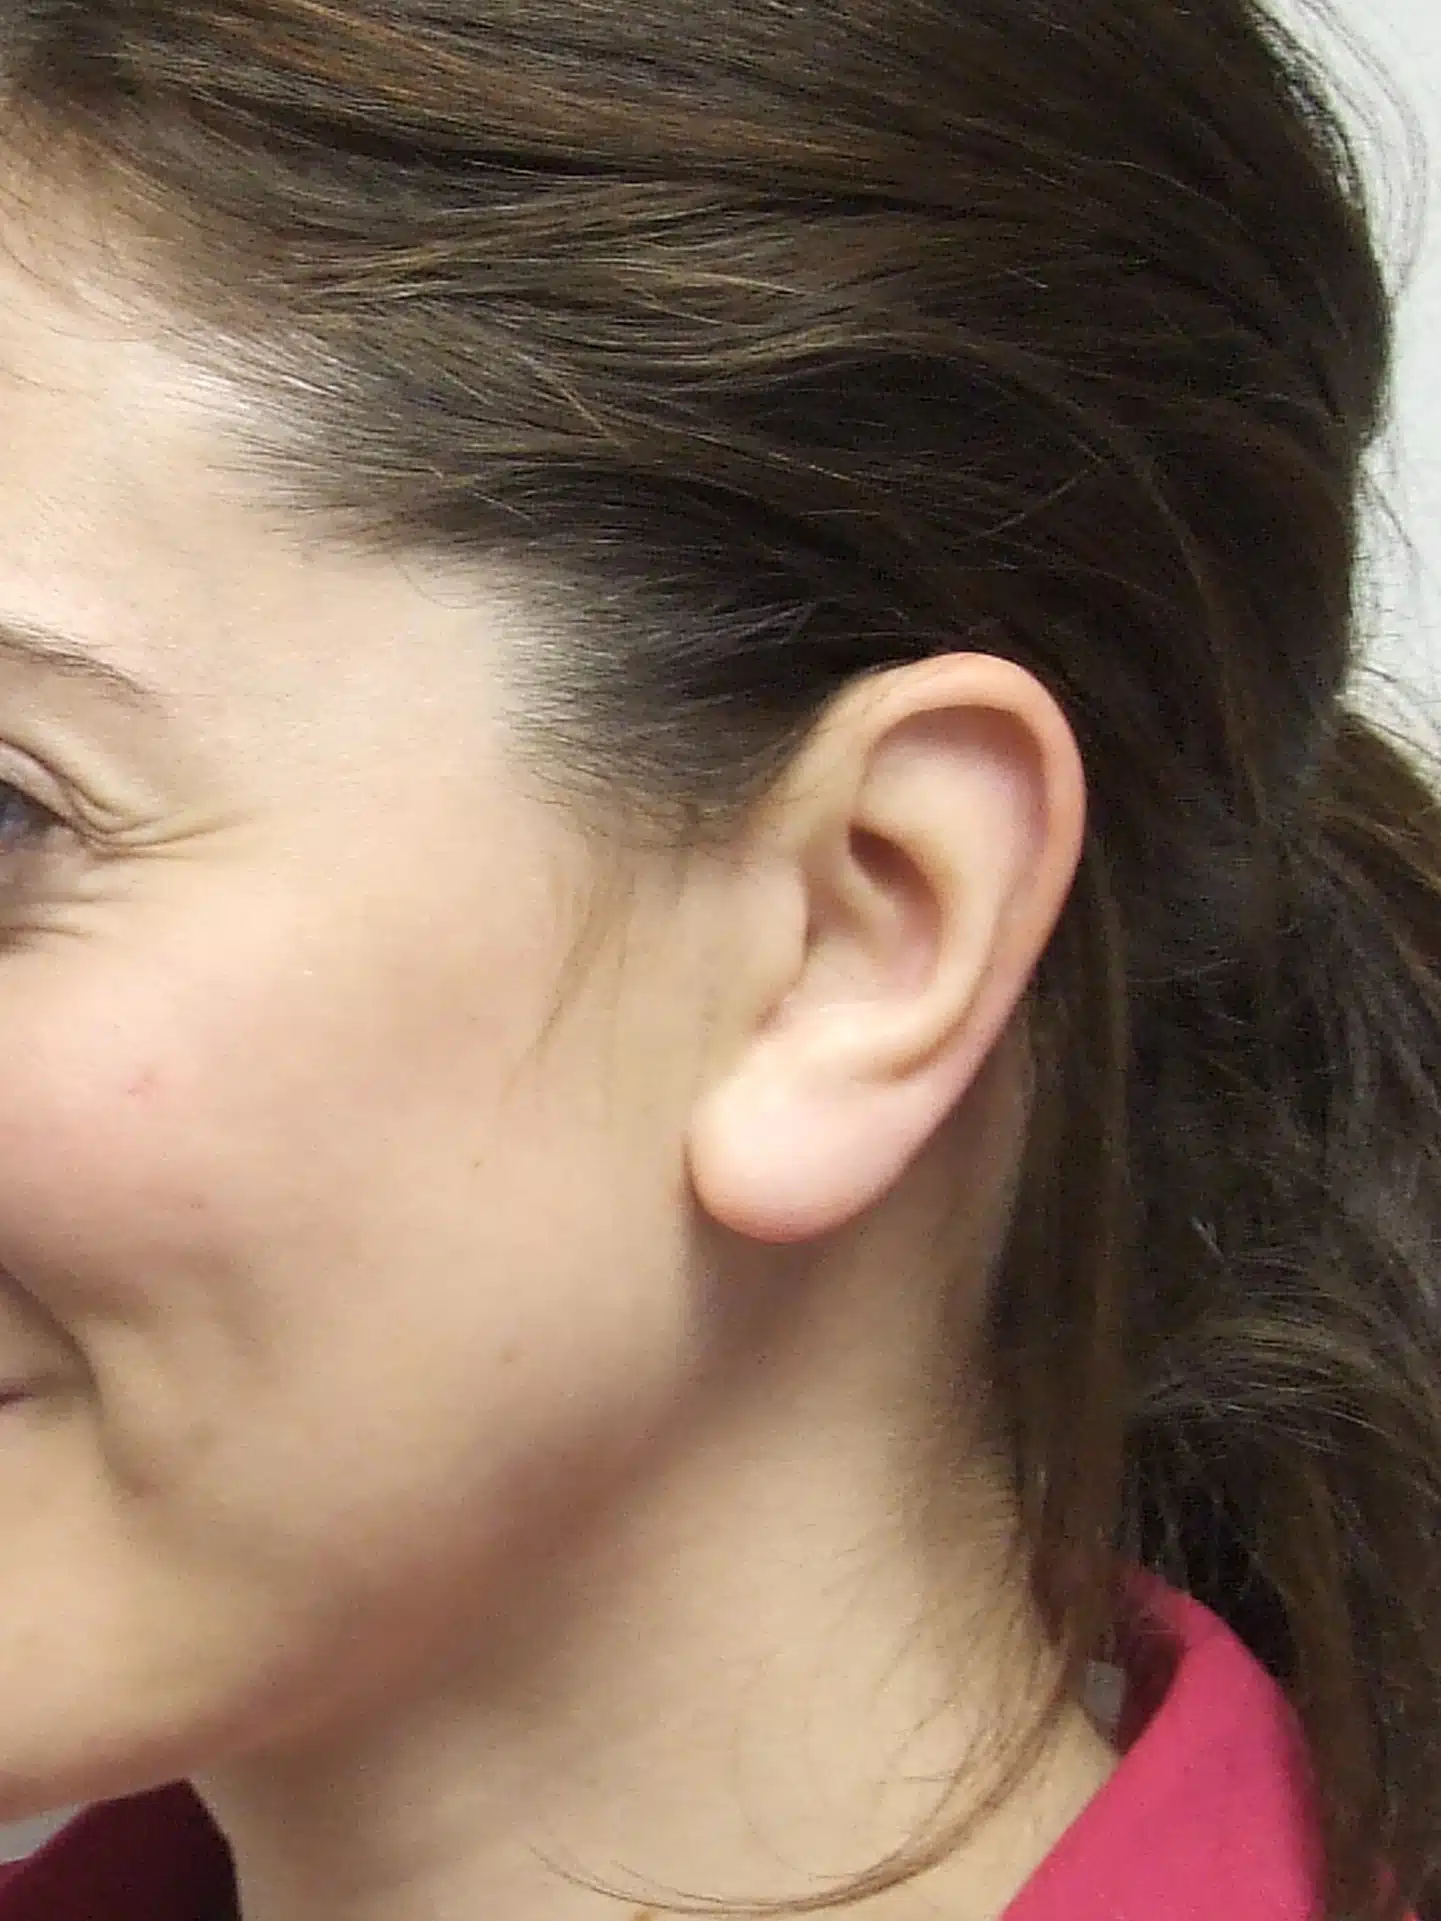 Photo of girl smiling with slipover ear prosthesis covering her poorly defined rib cartilage ear